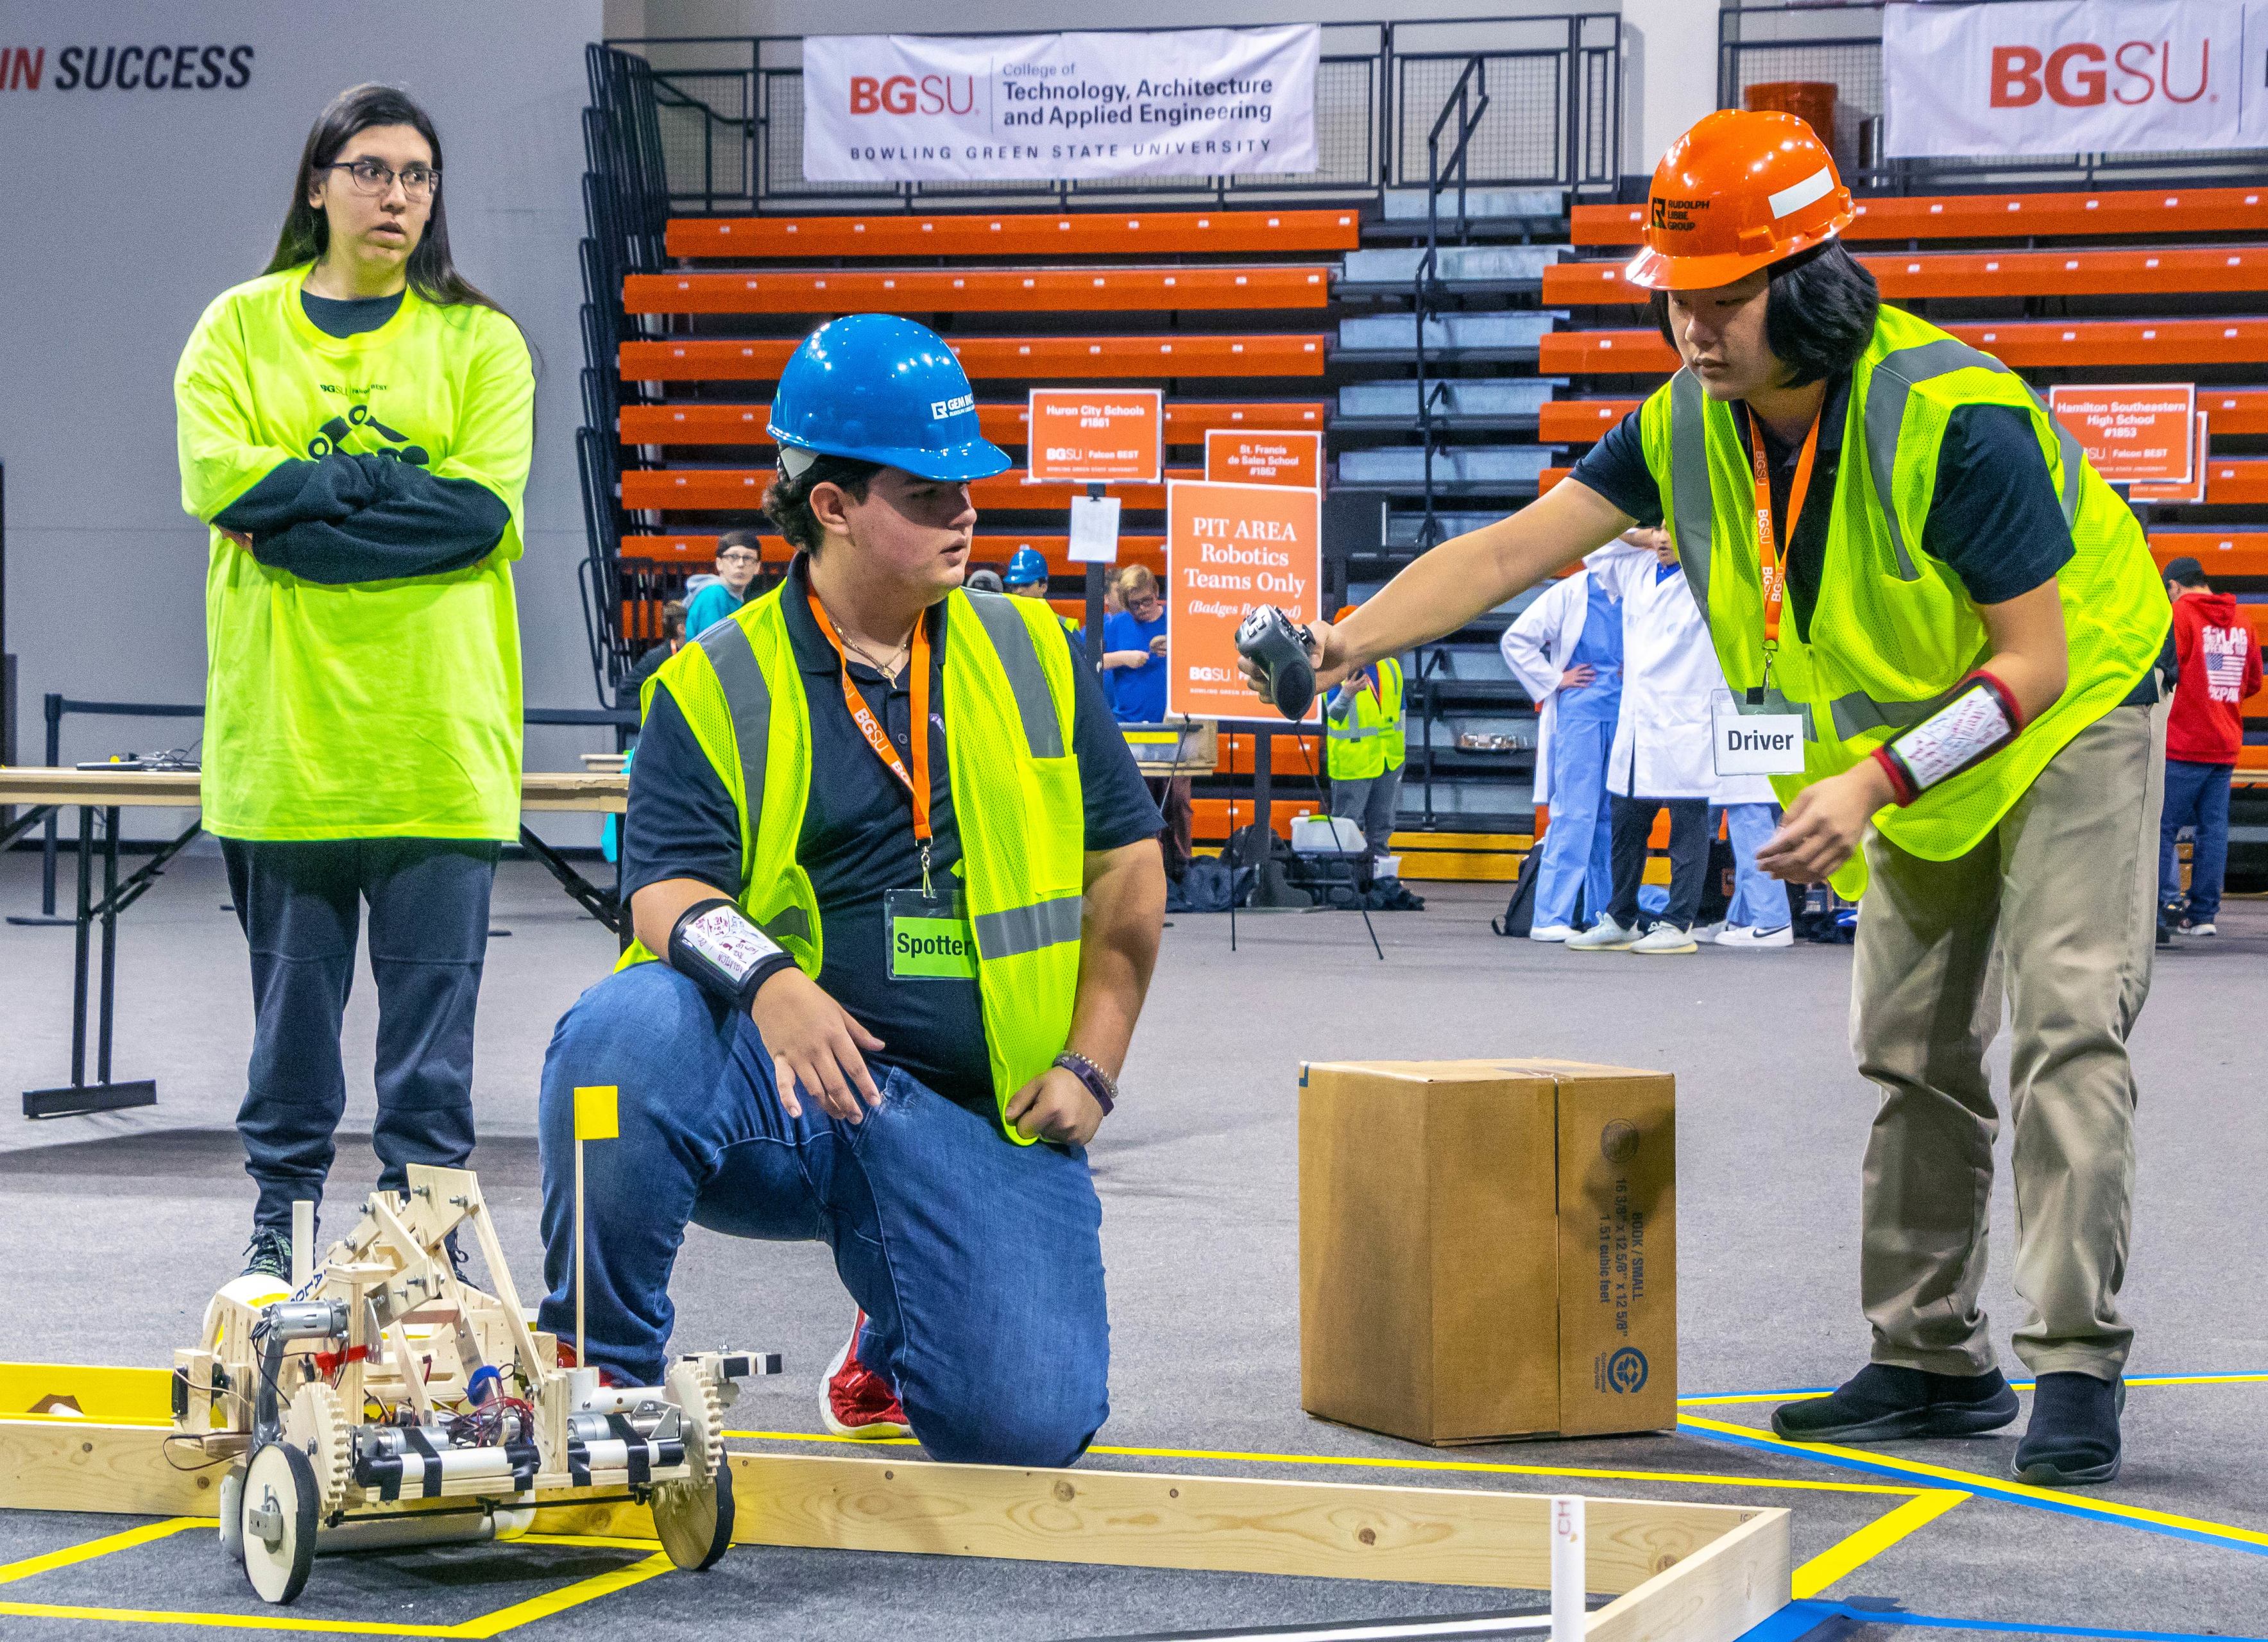 Two people operate a robot during a competition at BGSU.